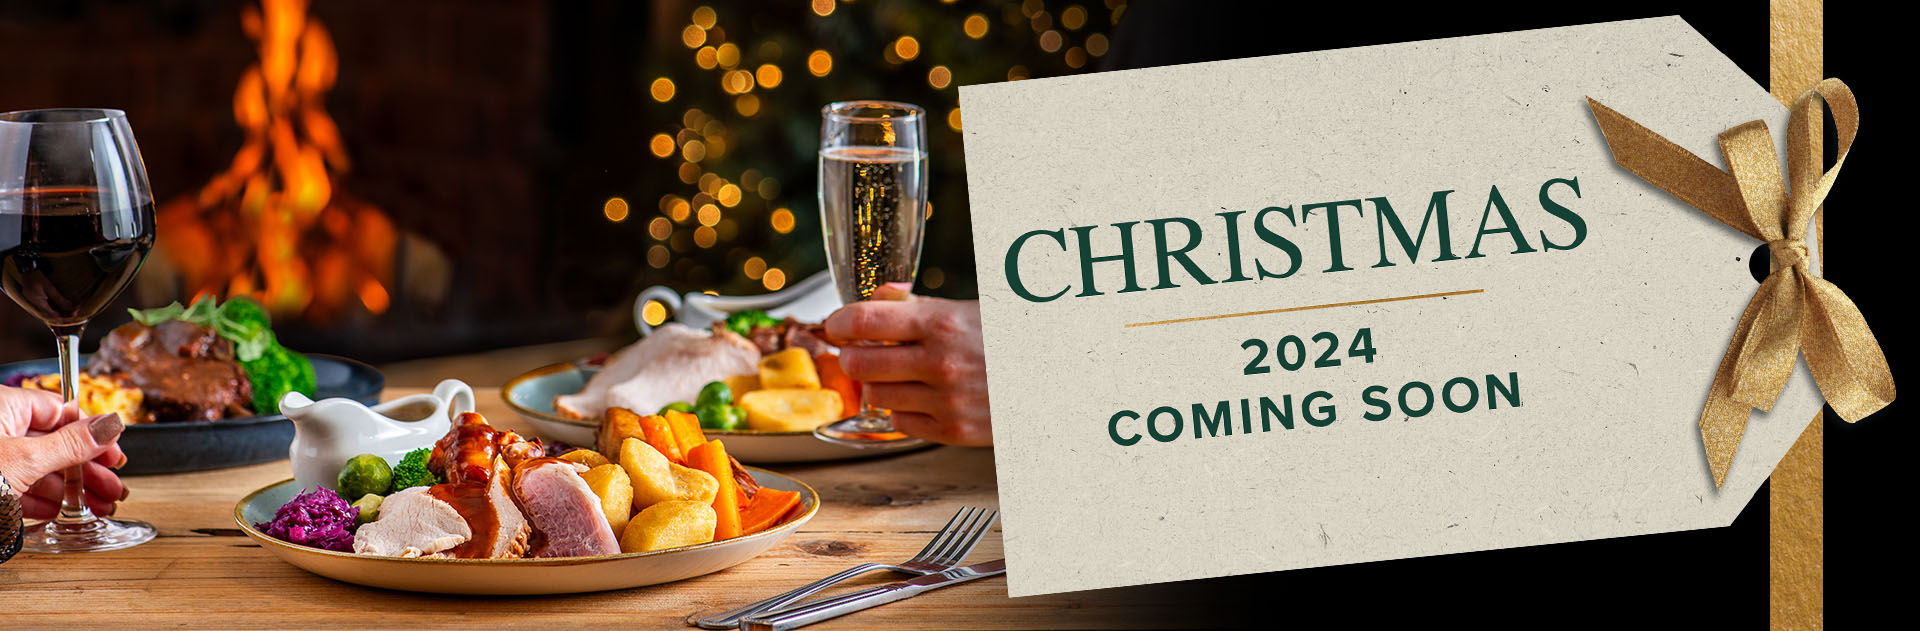 Christmas at The Essex Arms 